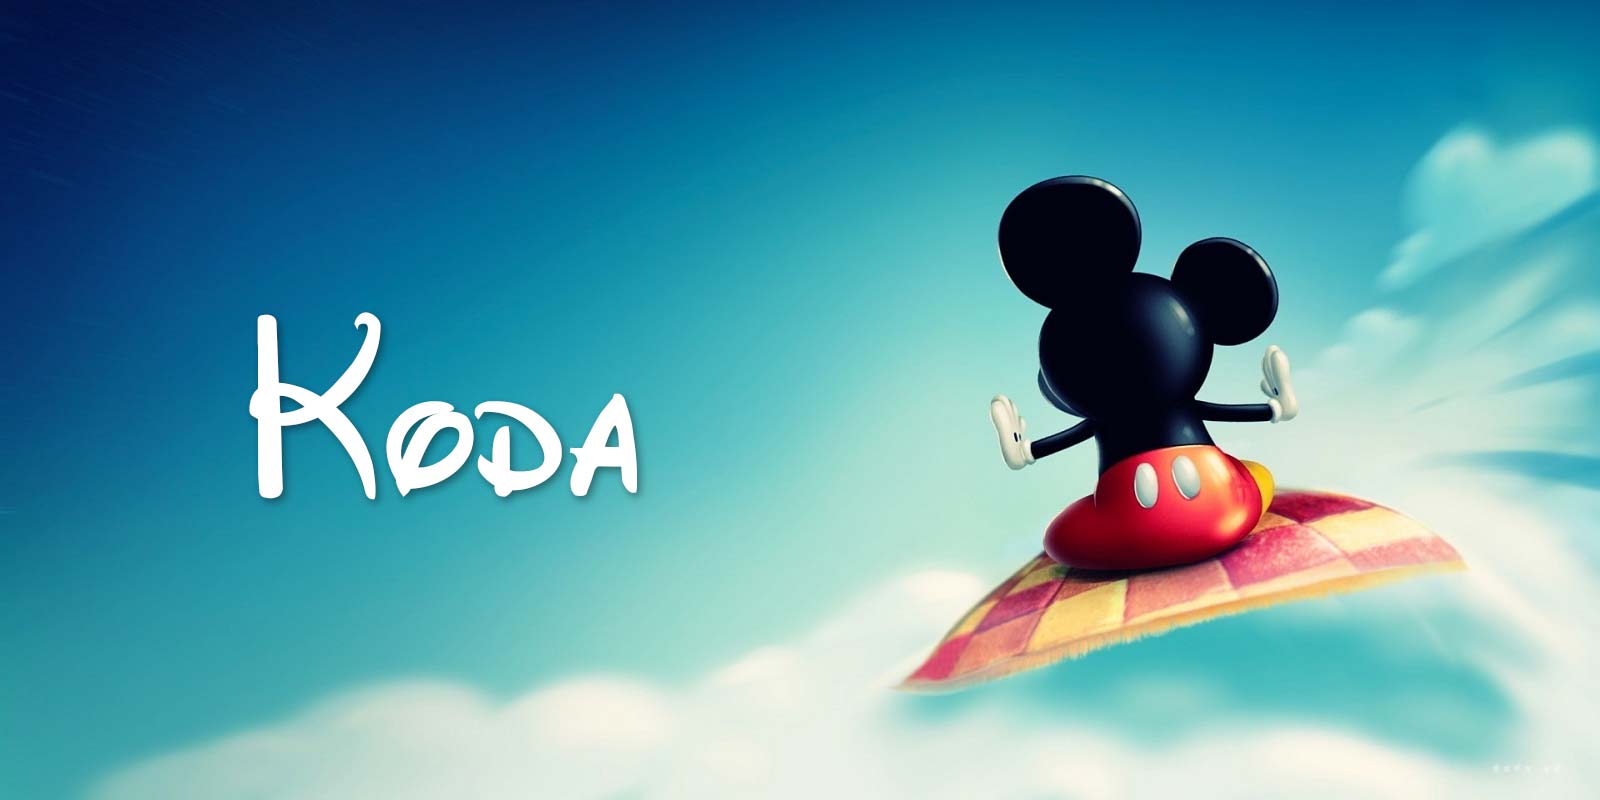 We Bet You Can’t Identify More Than 23/30 of These Disney Characters Koda